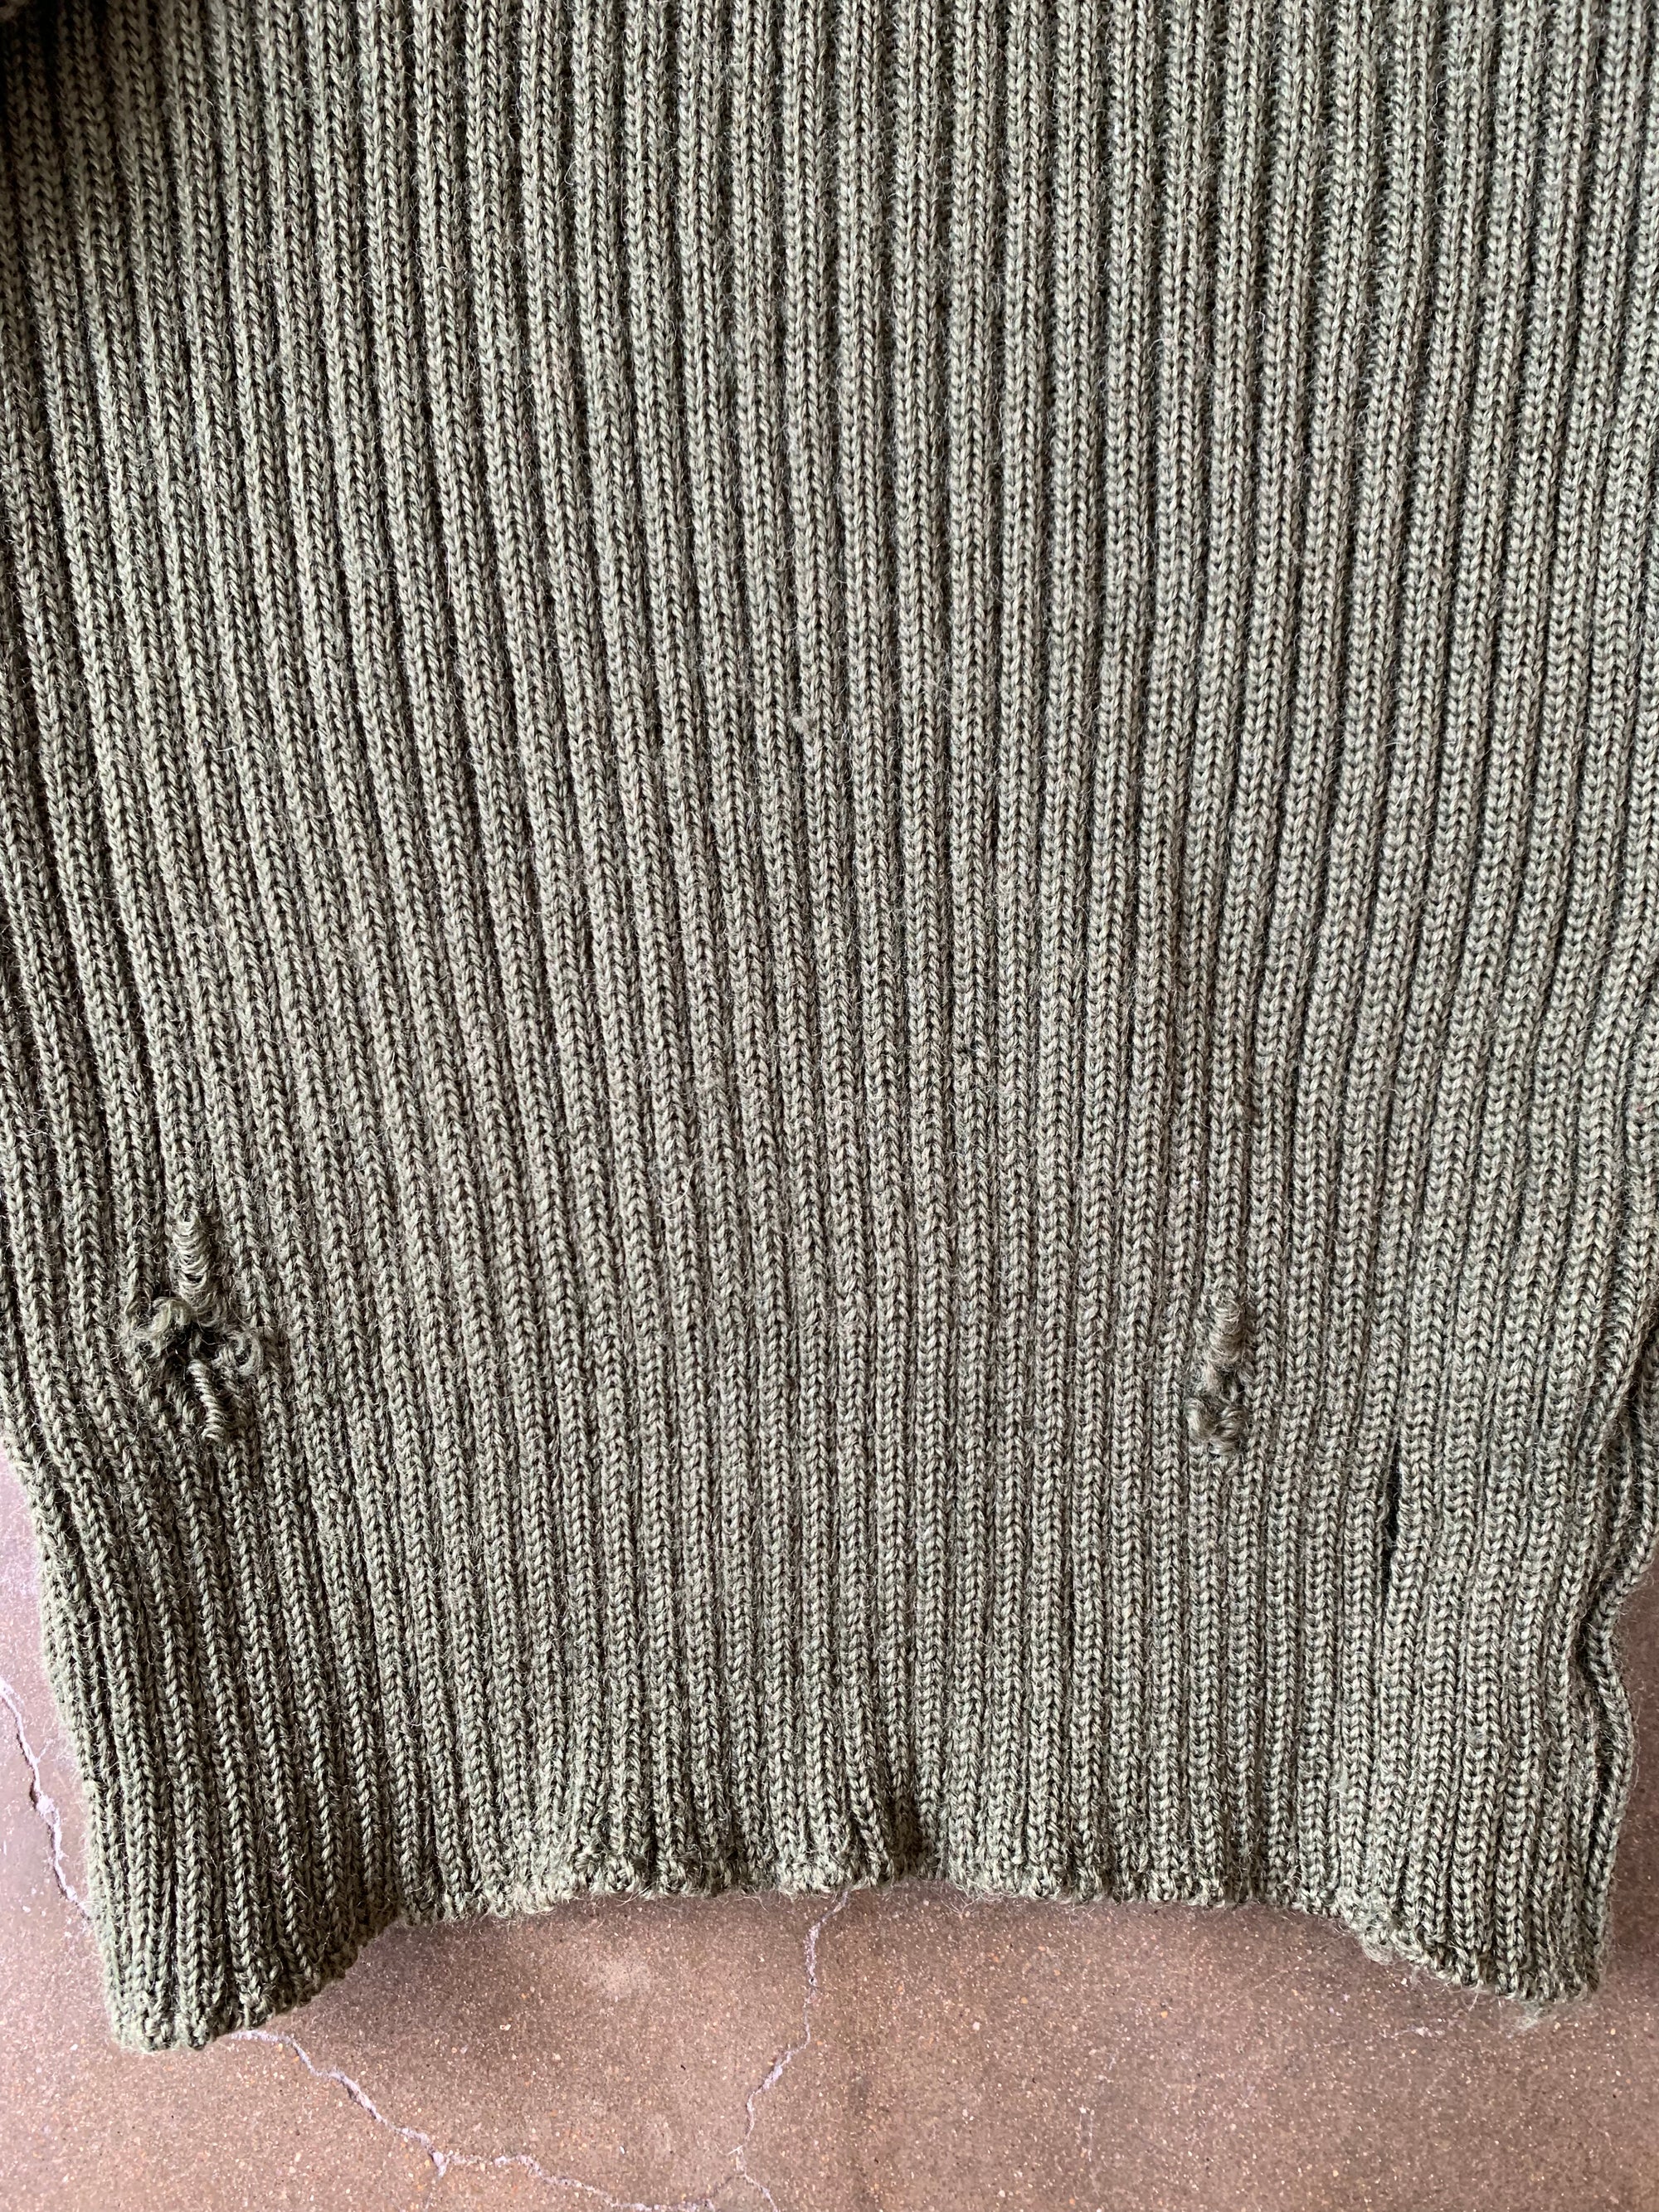 Vintage Military Issue Green Wool Sweater